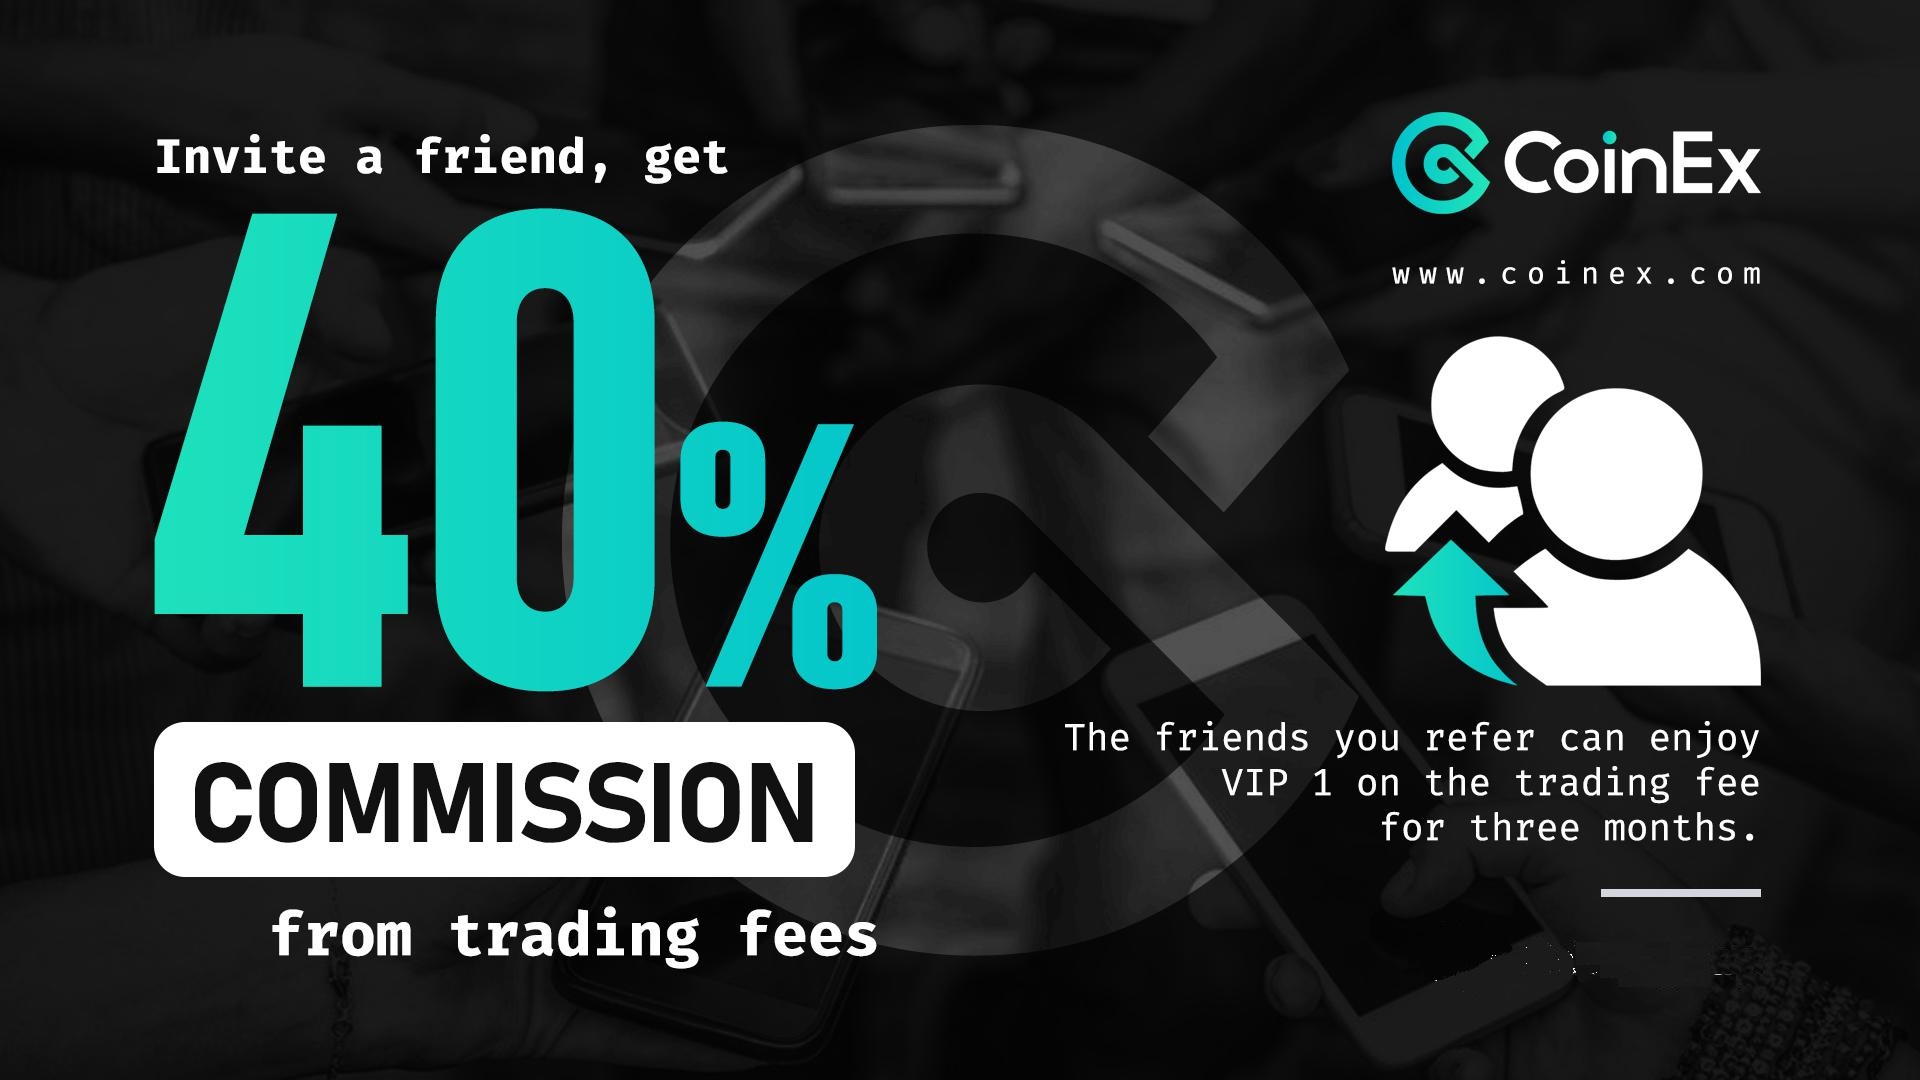 CoinEx Invite a Friends Bonus - Up to 40% of Trading Fee